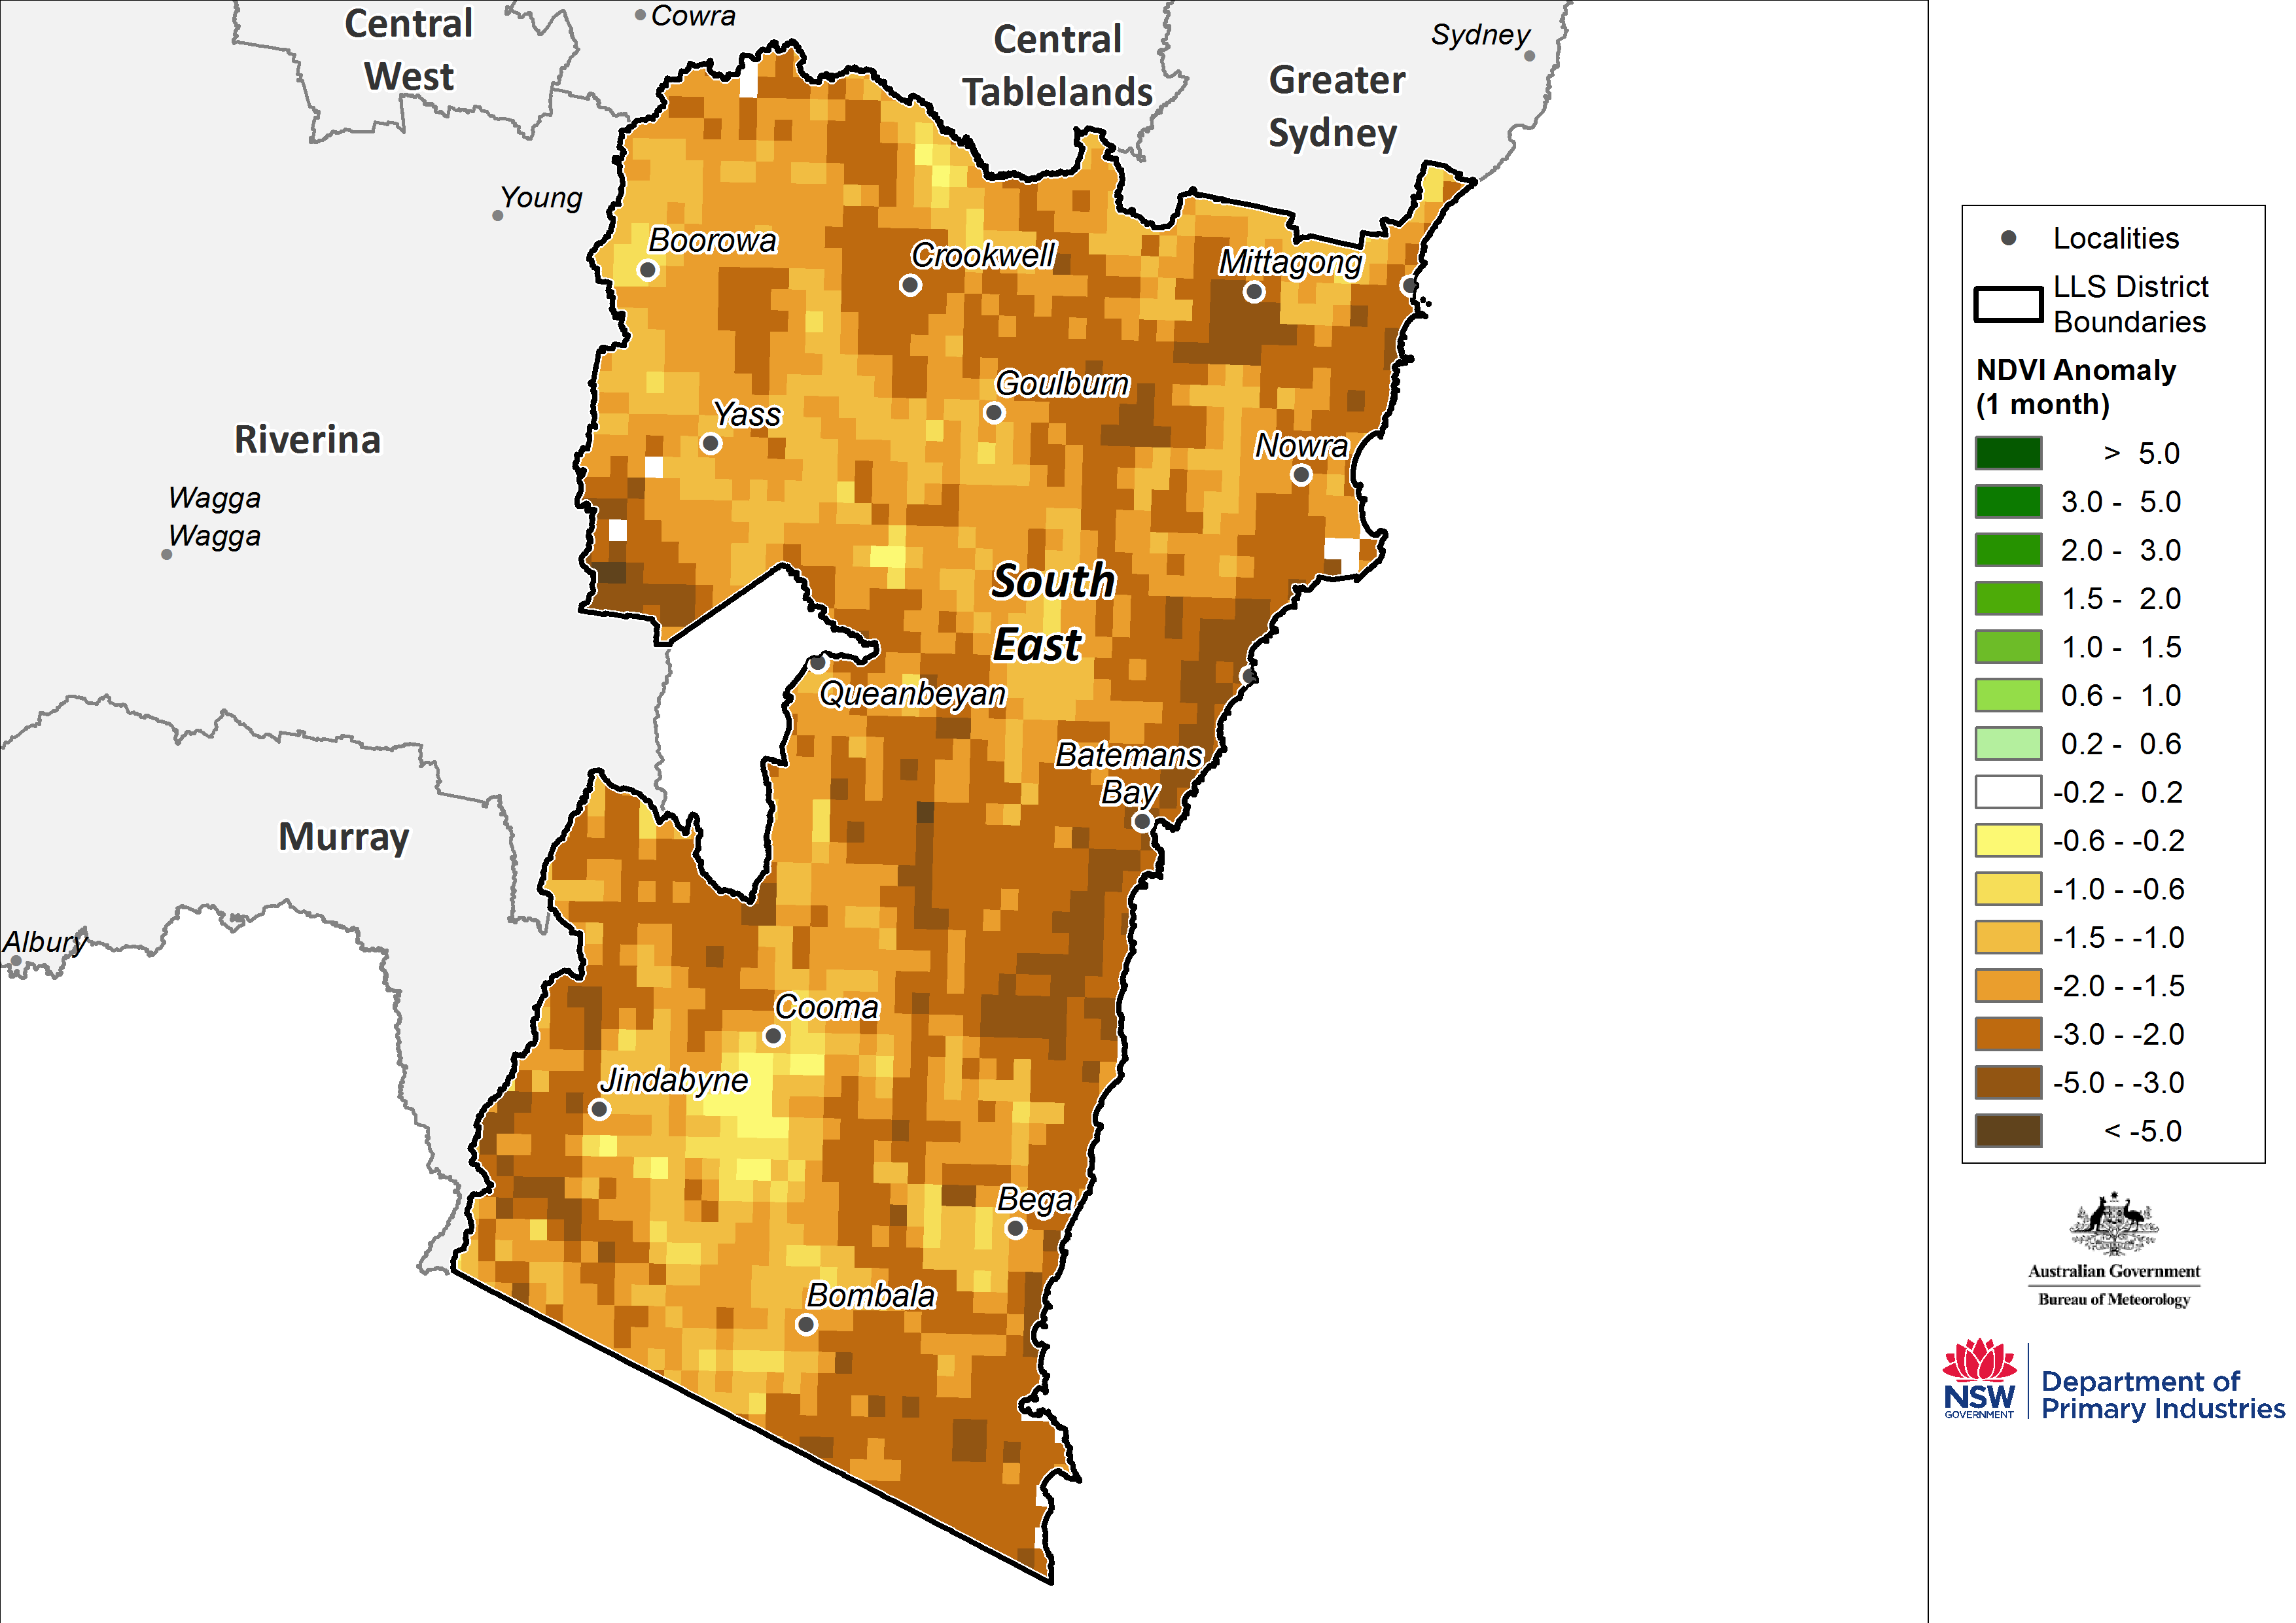 Monthly NDVI anomaly map for the South East region - For an accessible explanation of this image contact scott.wallace@dpi.nsw.gov.au